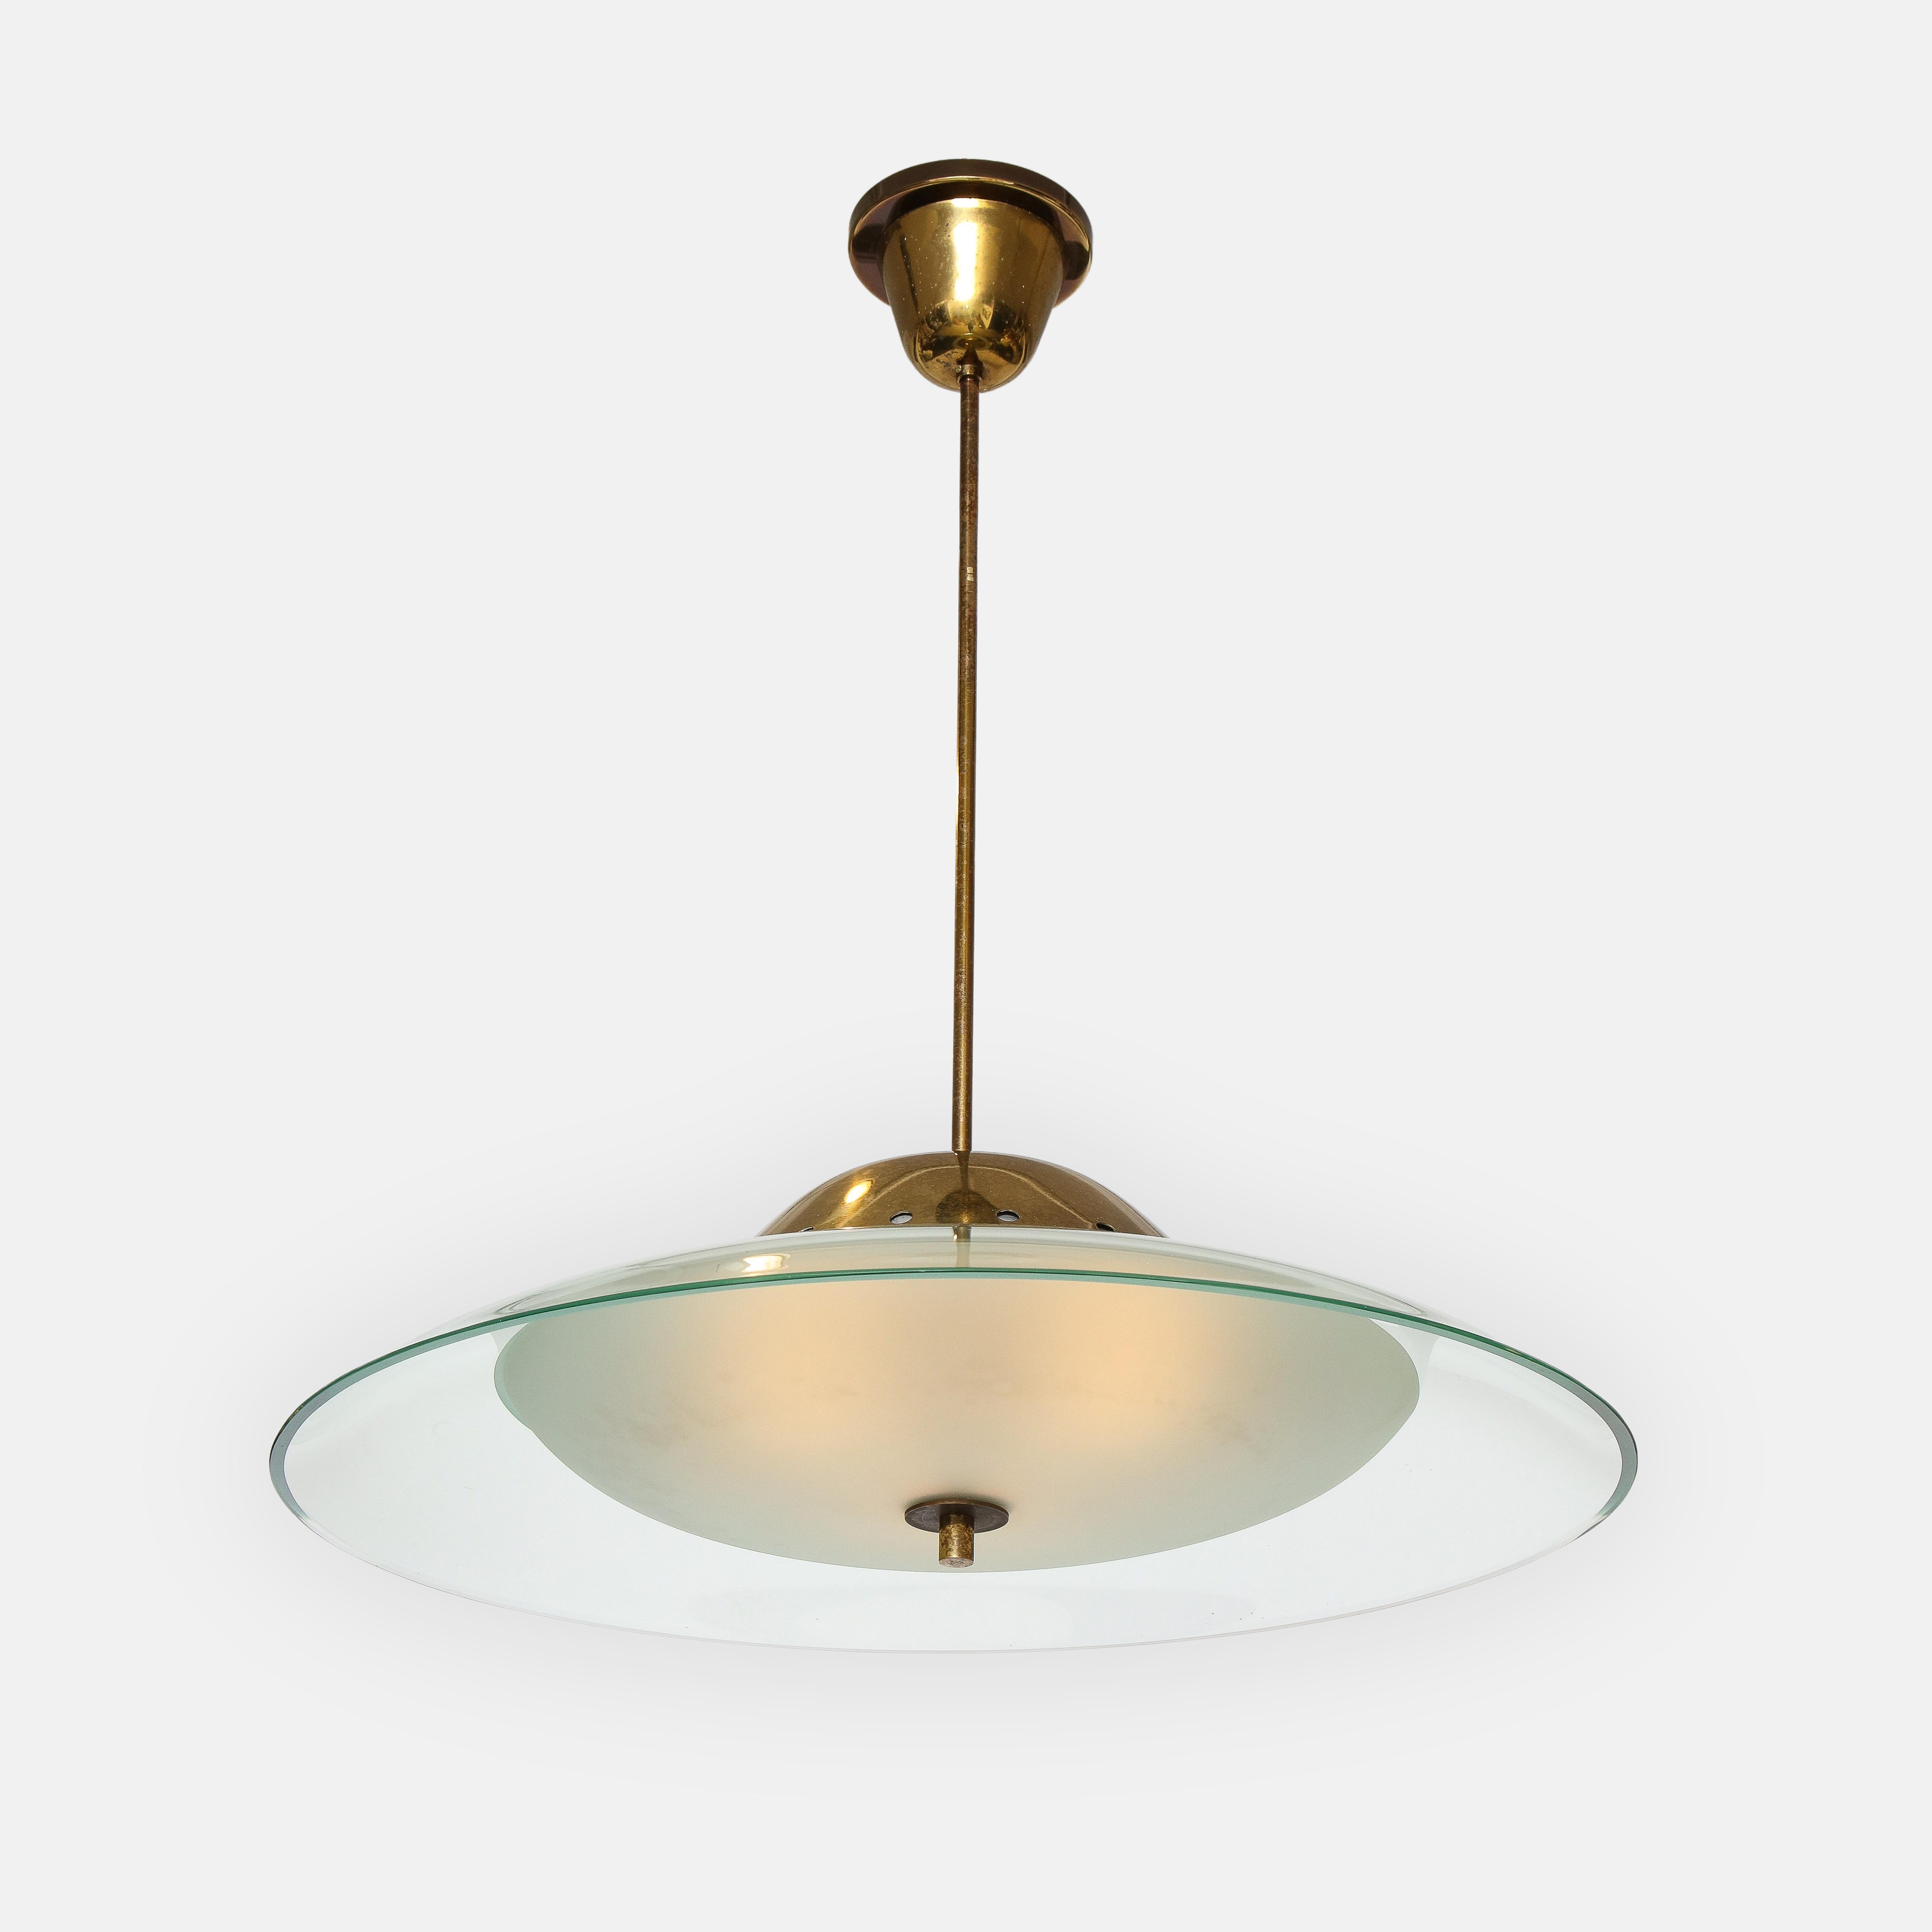 Max Ingrand for Fontana Arte model 1239 elegant chandelier or suspension light with large curved polished crystal glass disc atop frosted glass diffuser with central brass ornament, and suspended on brass mount, stem and original canopy. This lovely